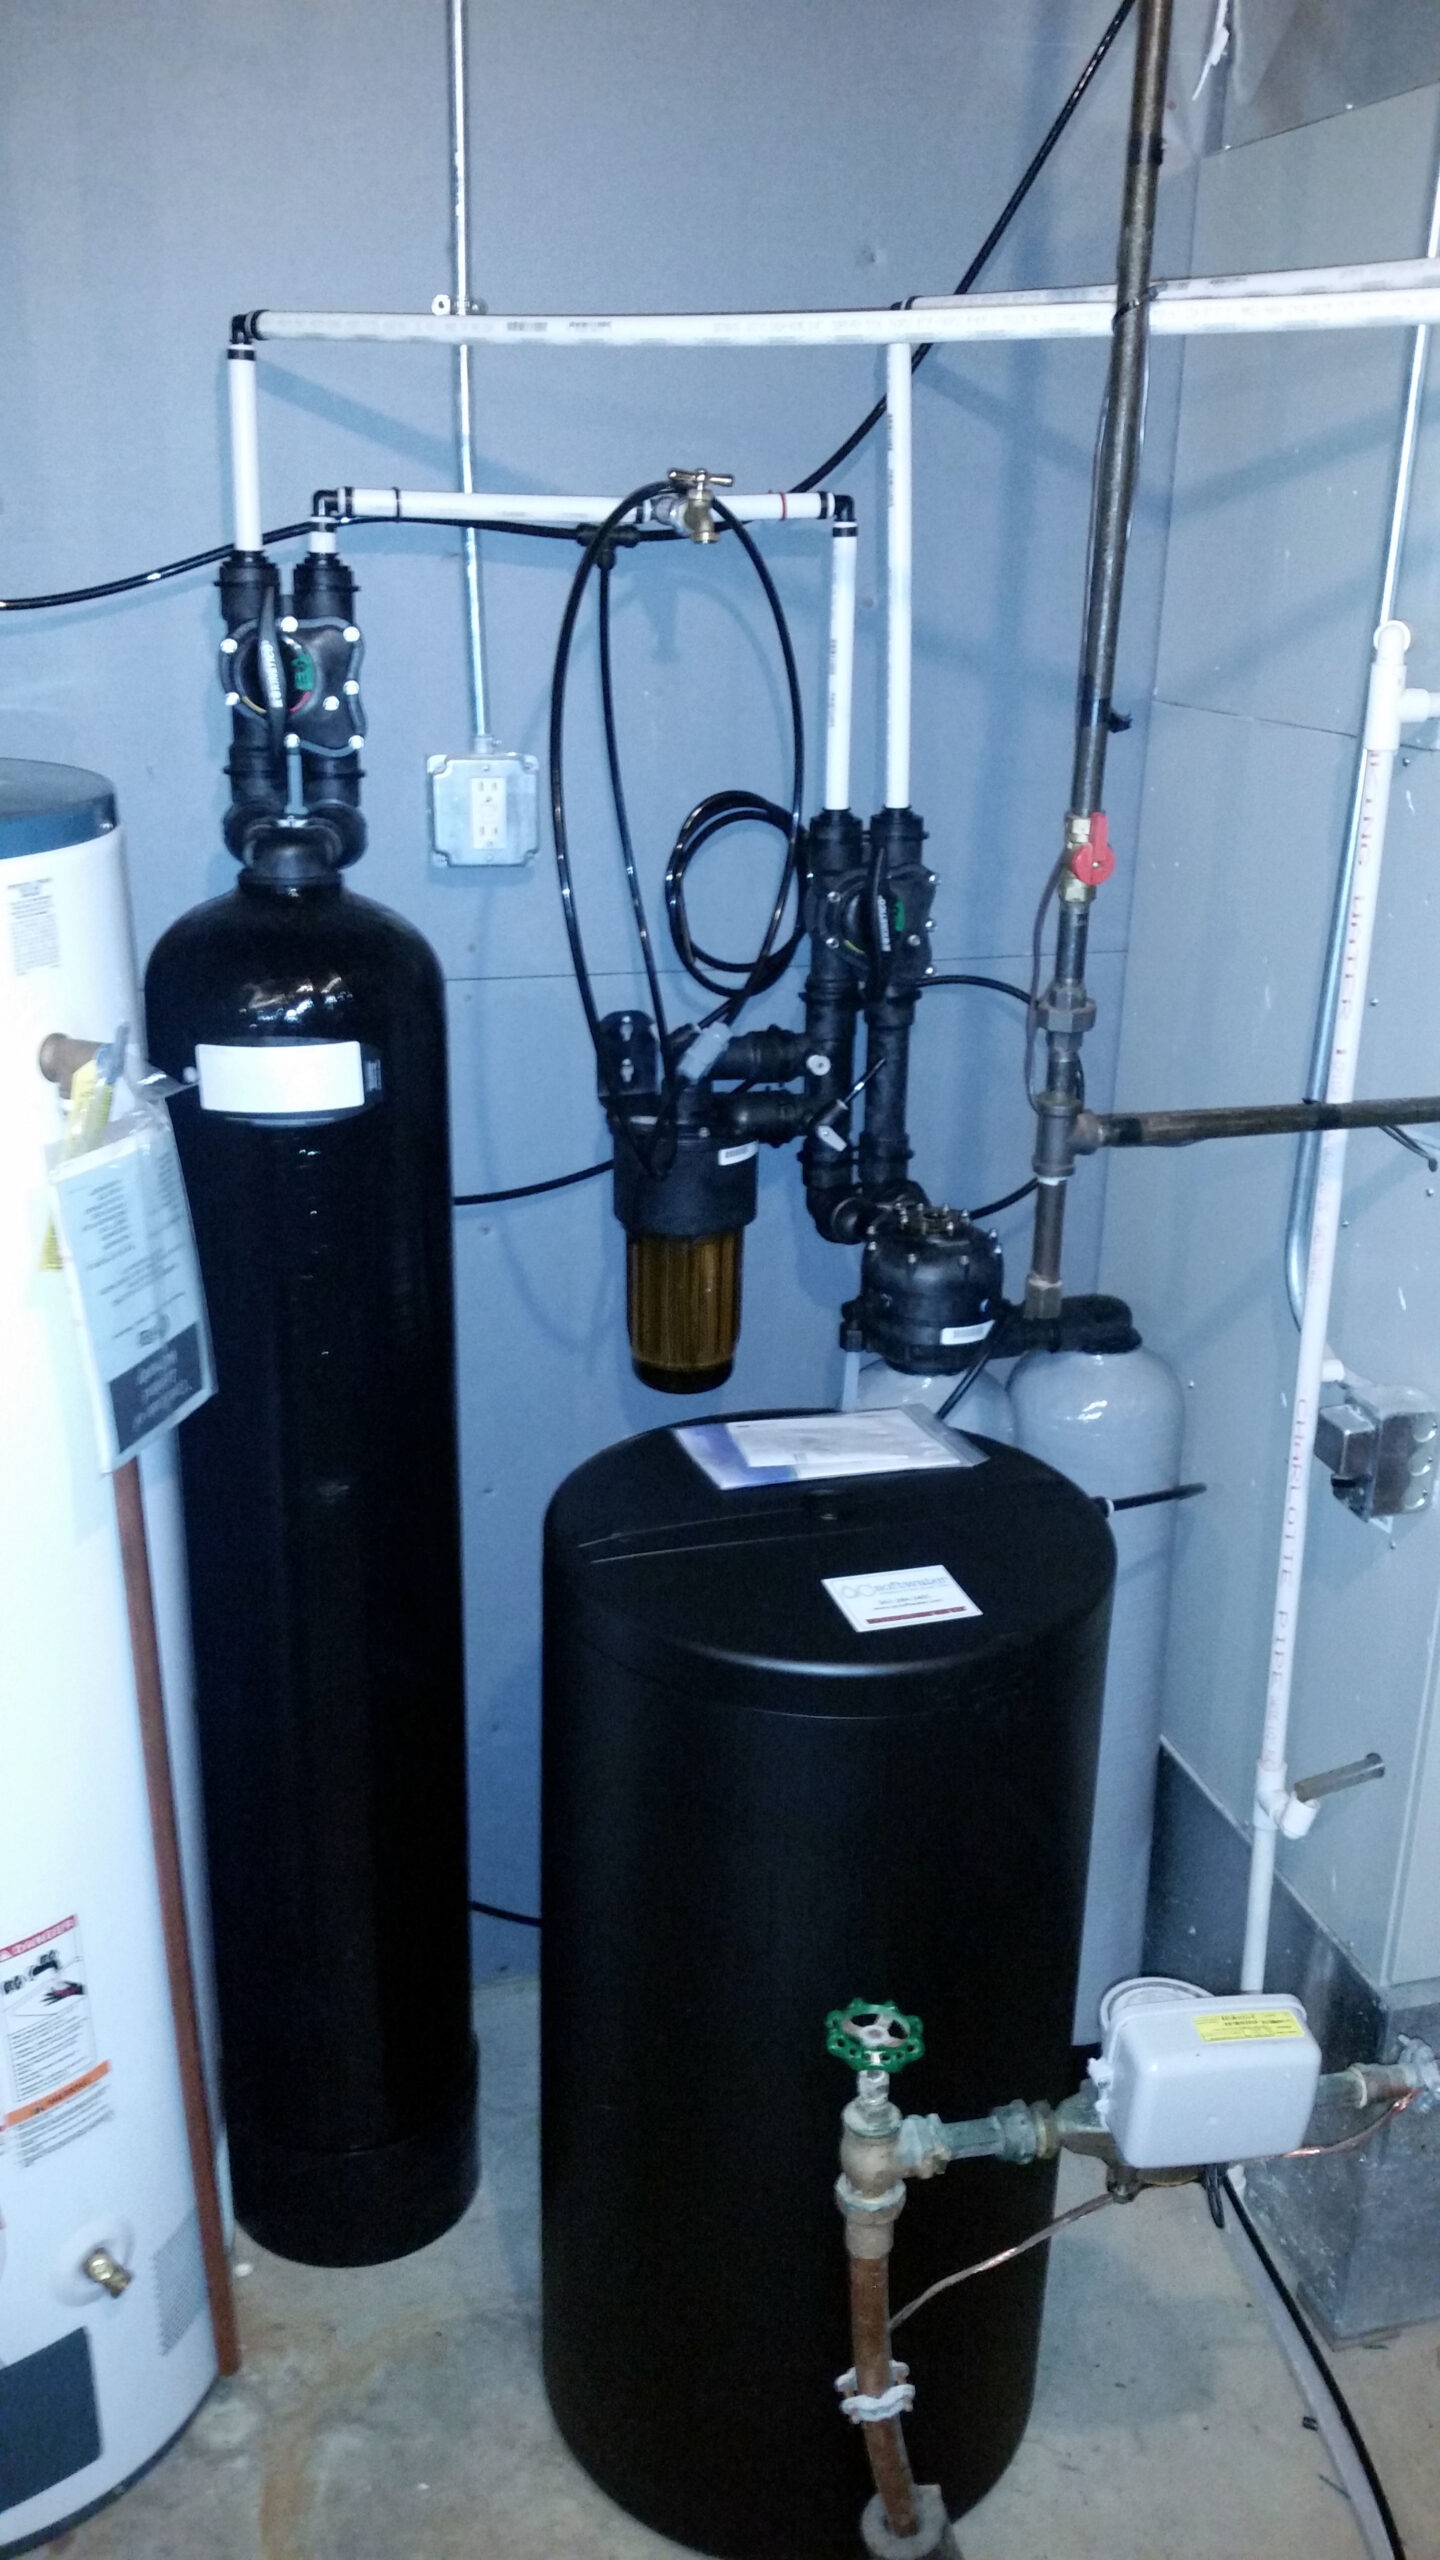 Whole house water treatment system in Le Claire, Iowa